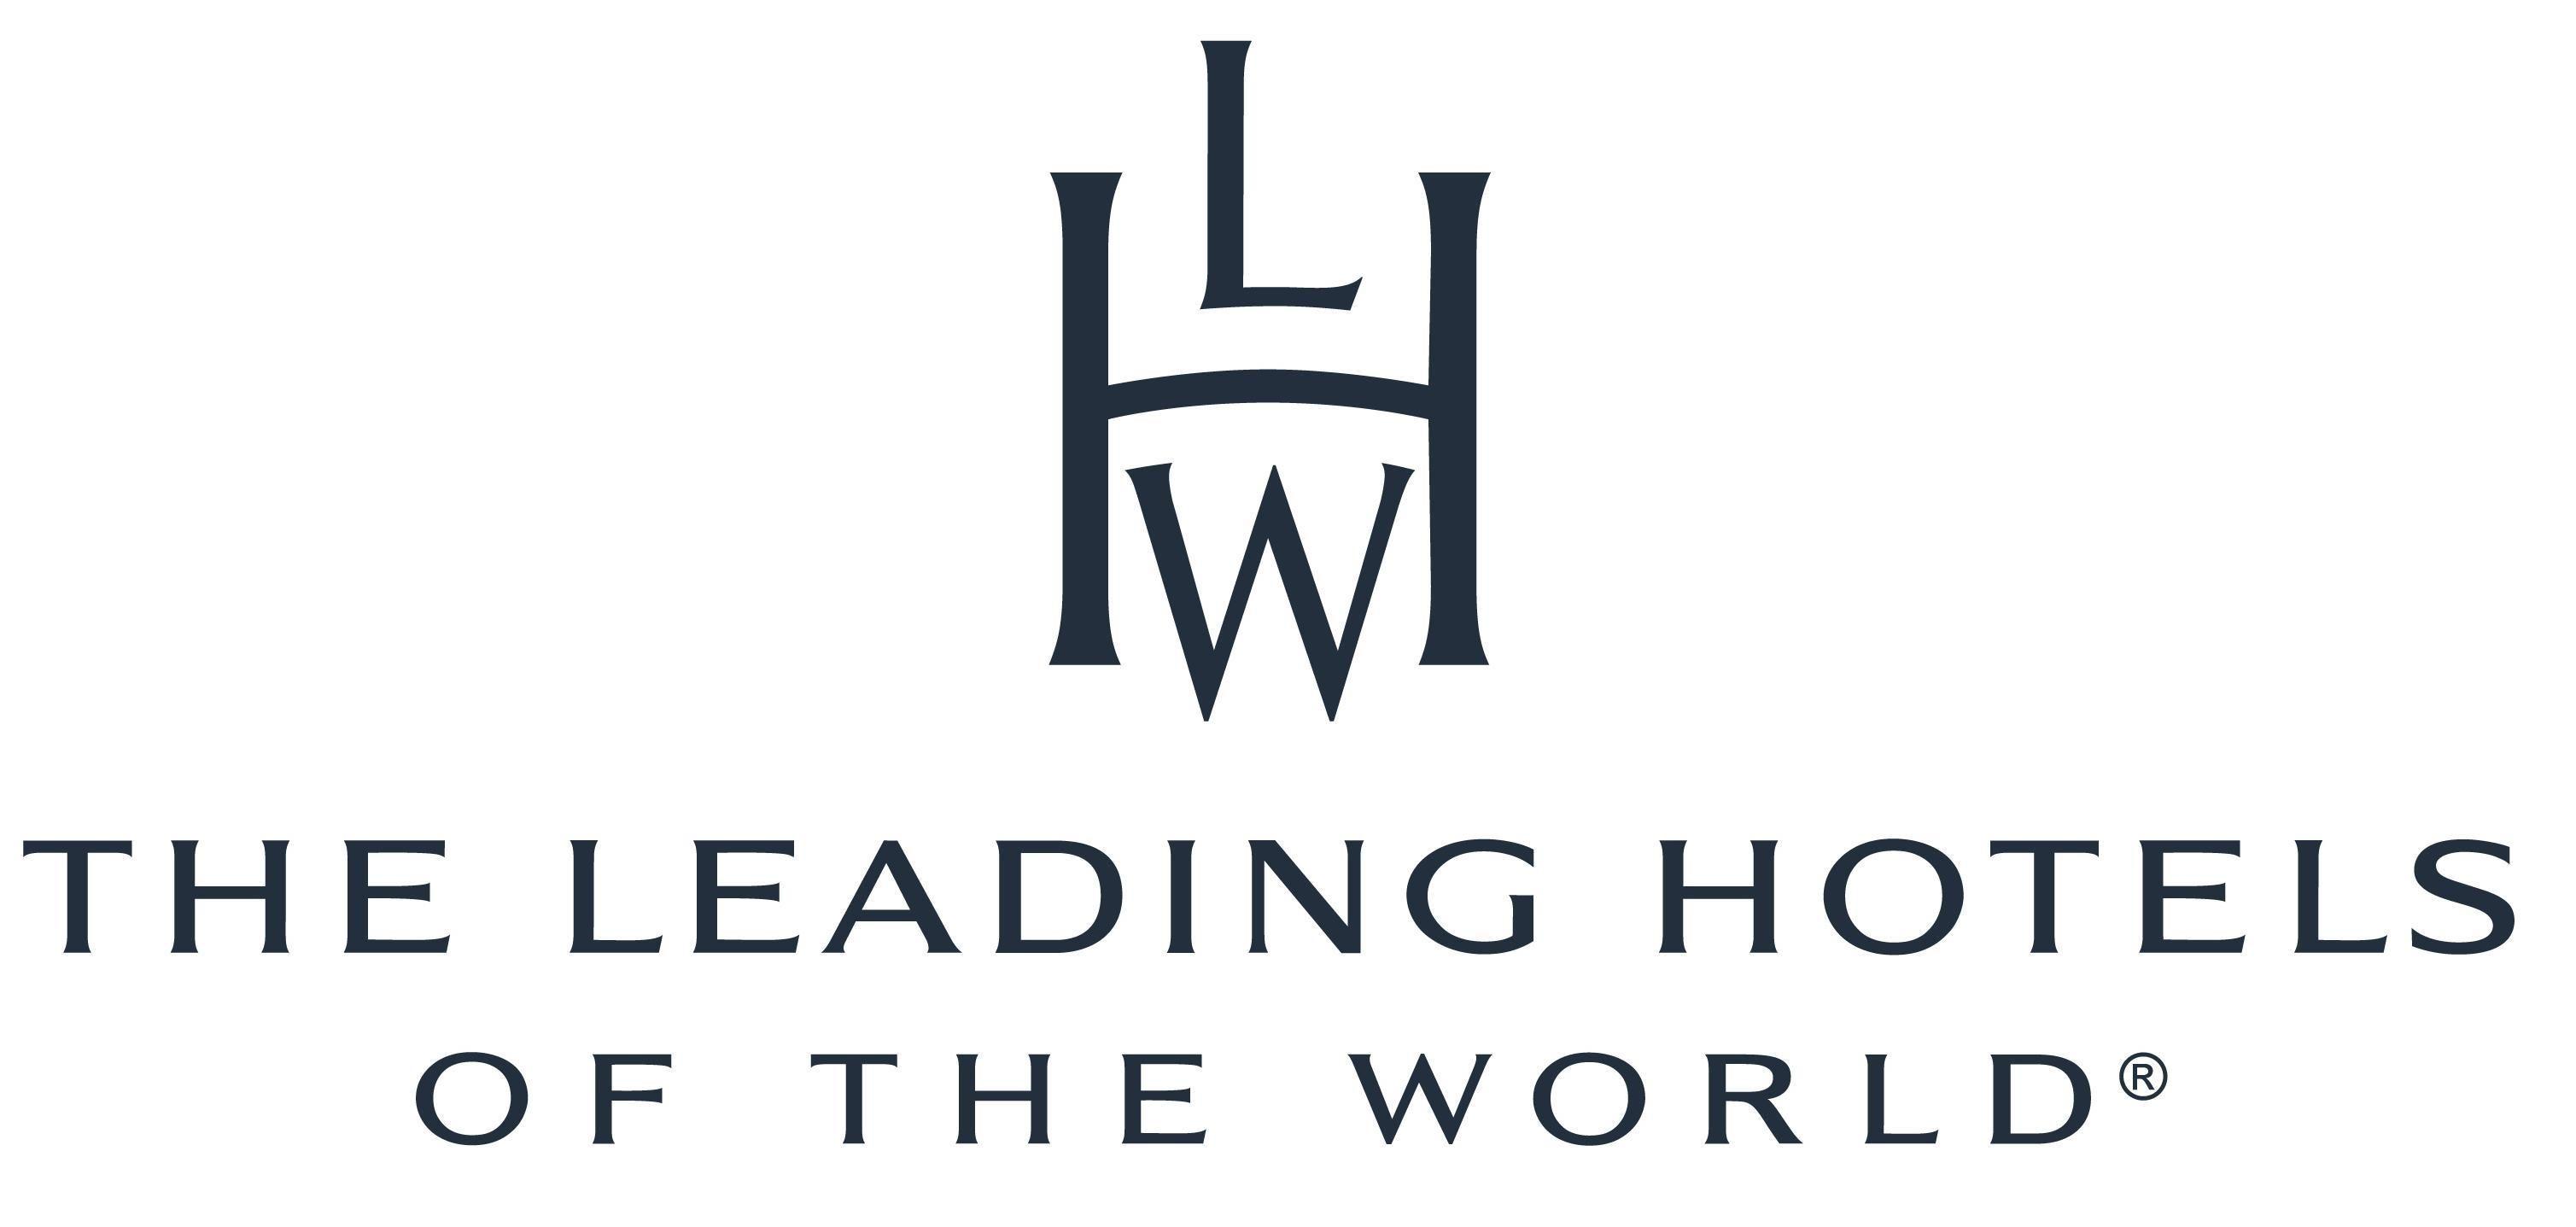 Leading Hotel Logo - The Leading Hotels Competitors, Revenue and Employees - Owler ...